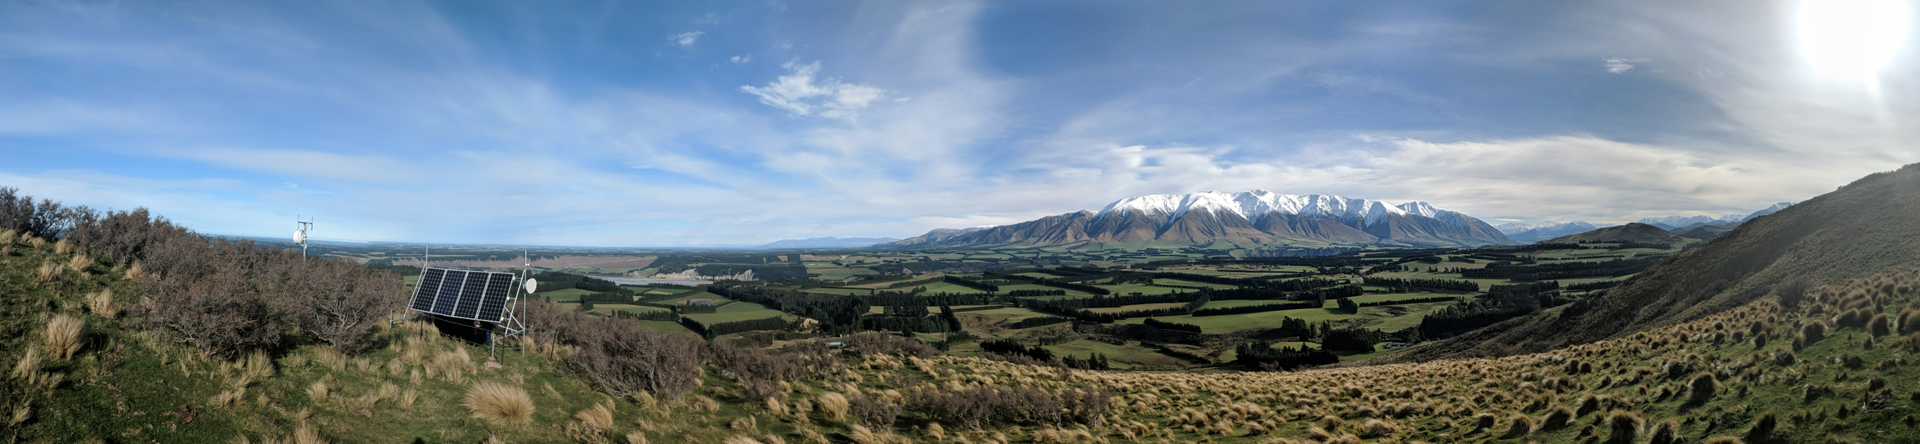 new zealand canterbury high country mountains